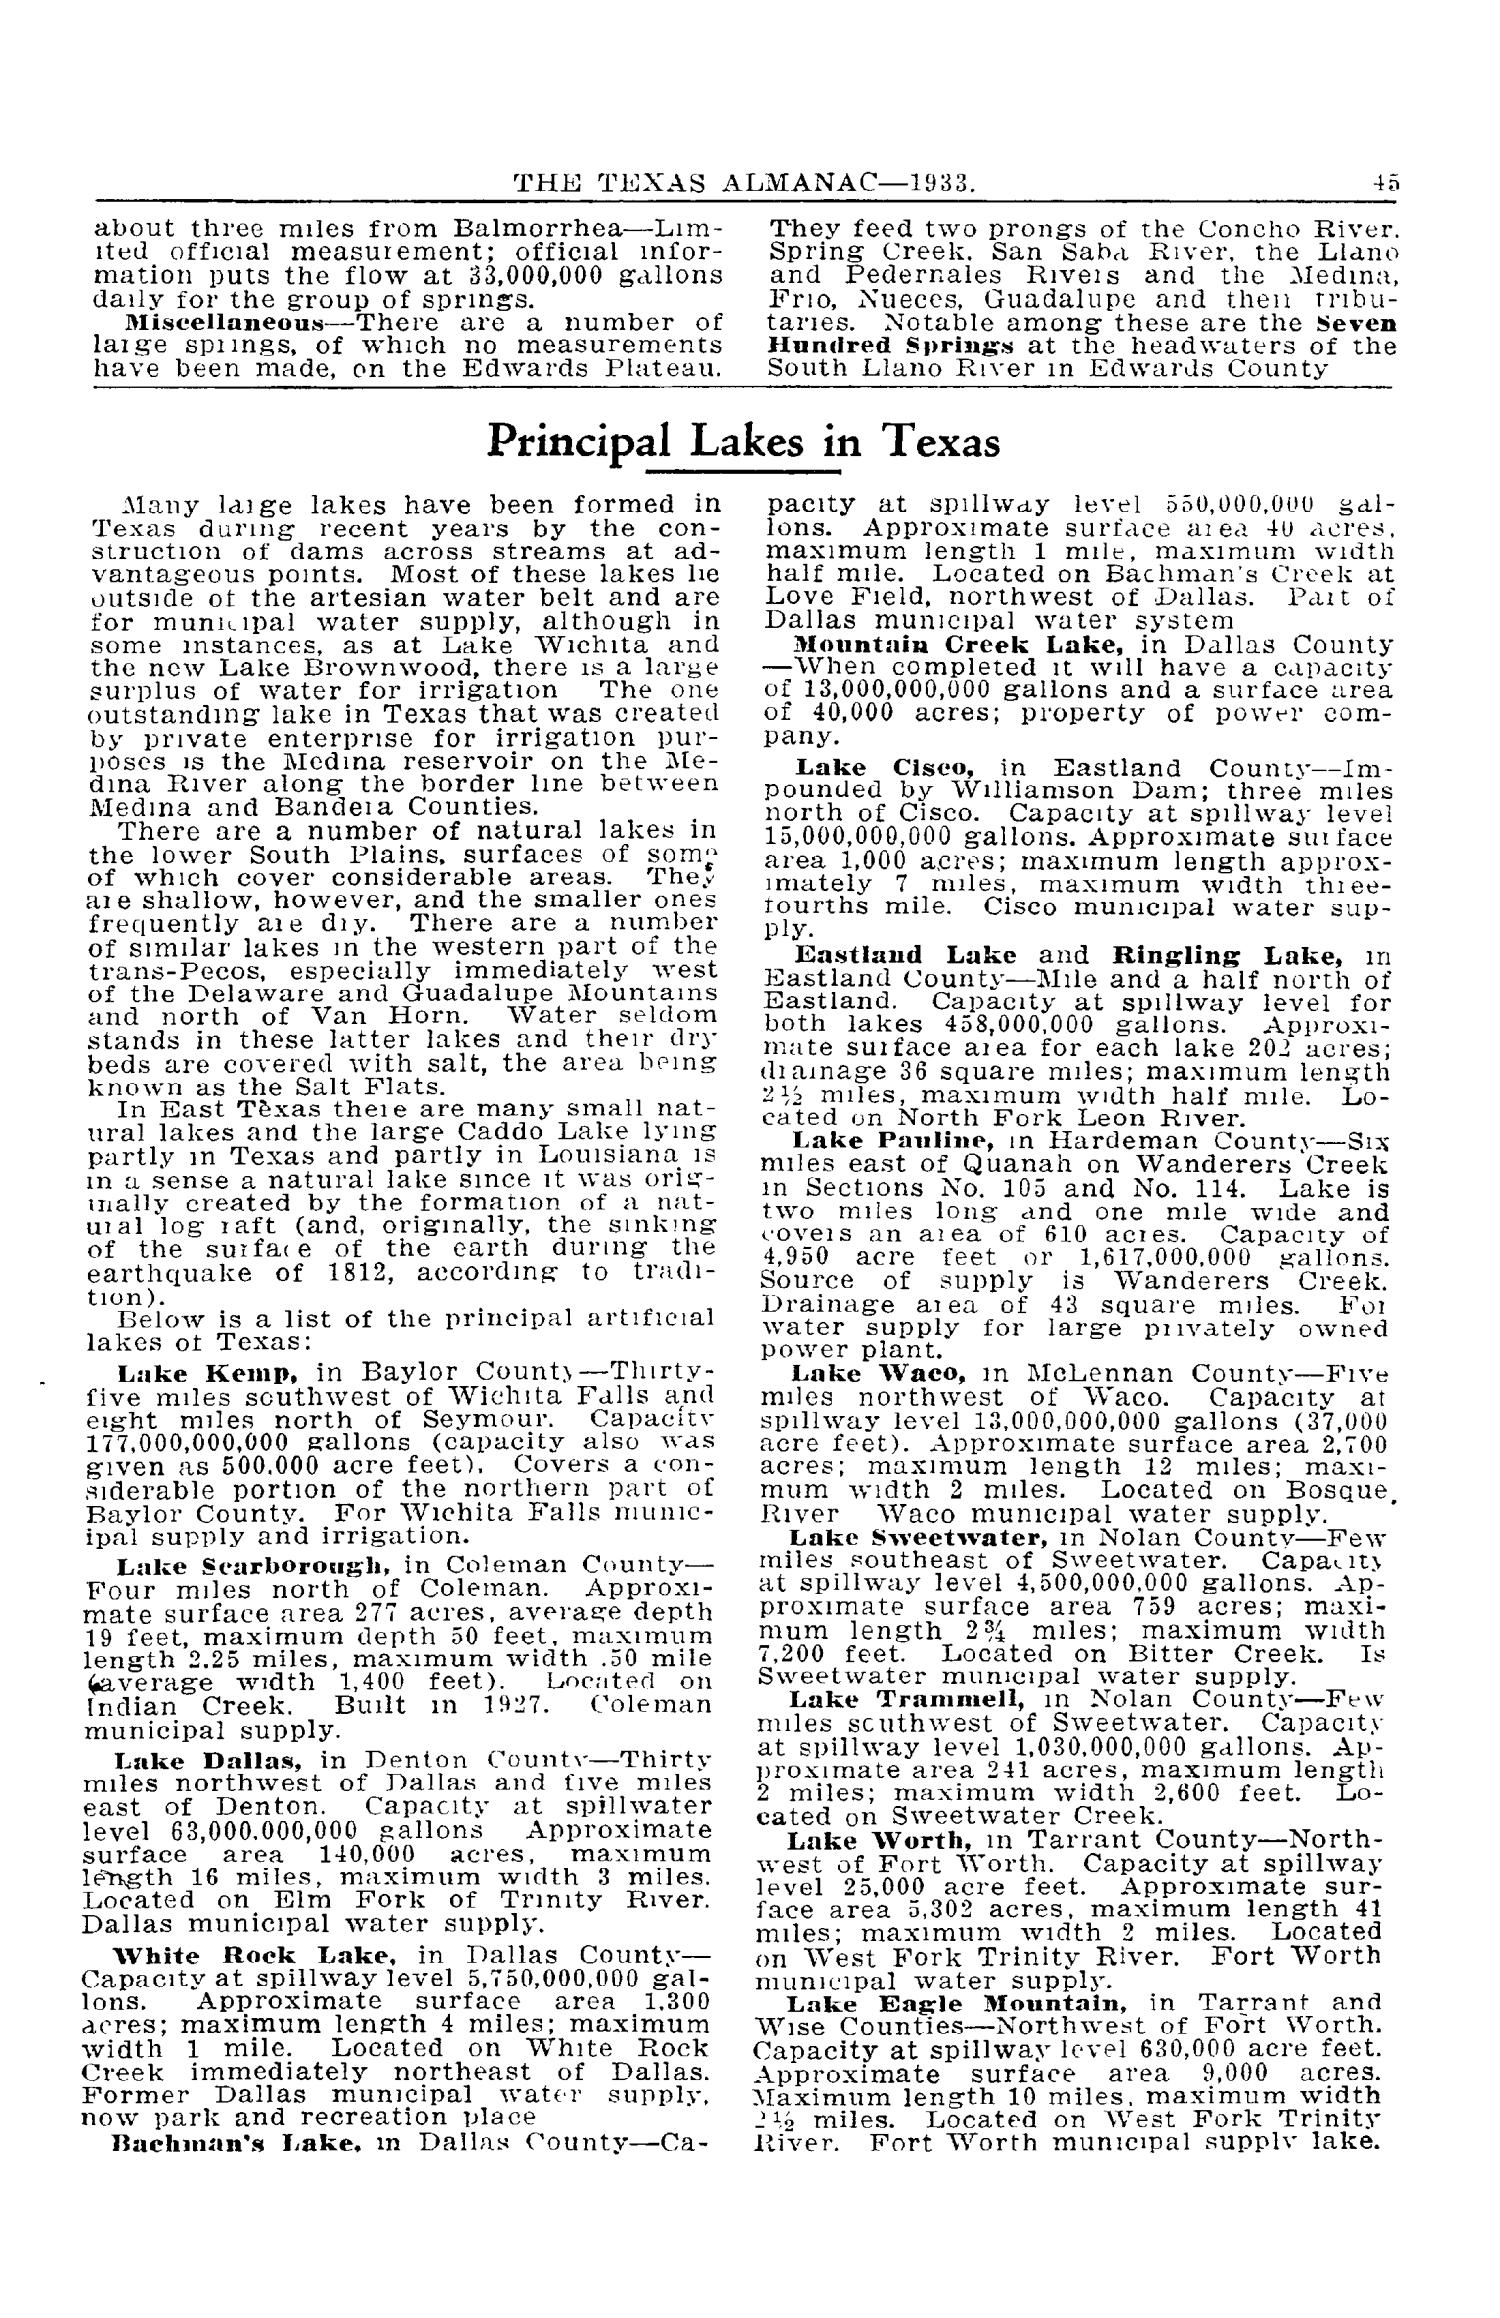 Texas Almanac and State Industrial Guide 1933
                                                
                                                    45
                                                